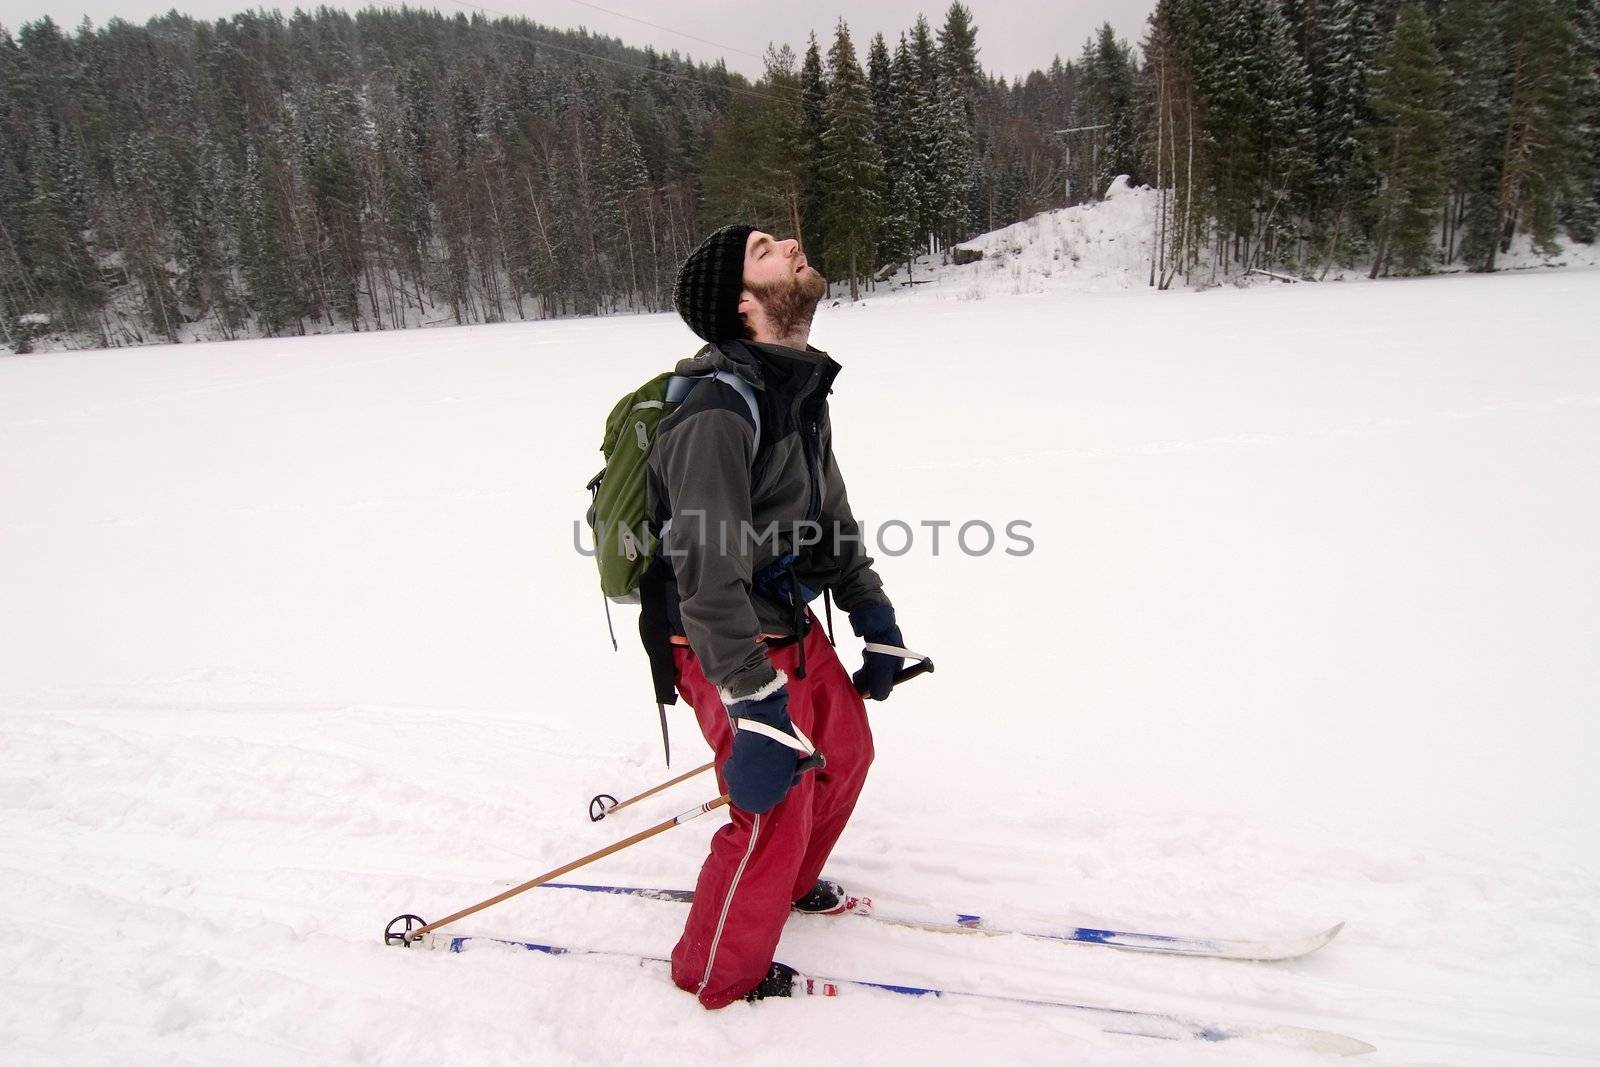 A cross country skiier looking like he is very tired. Humorous image.